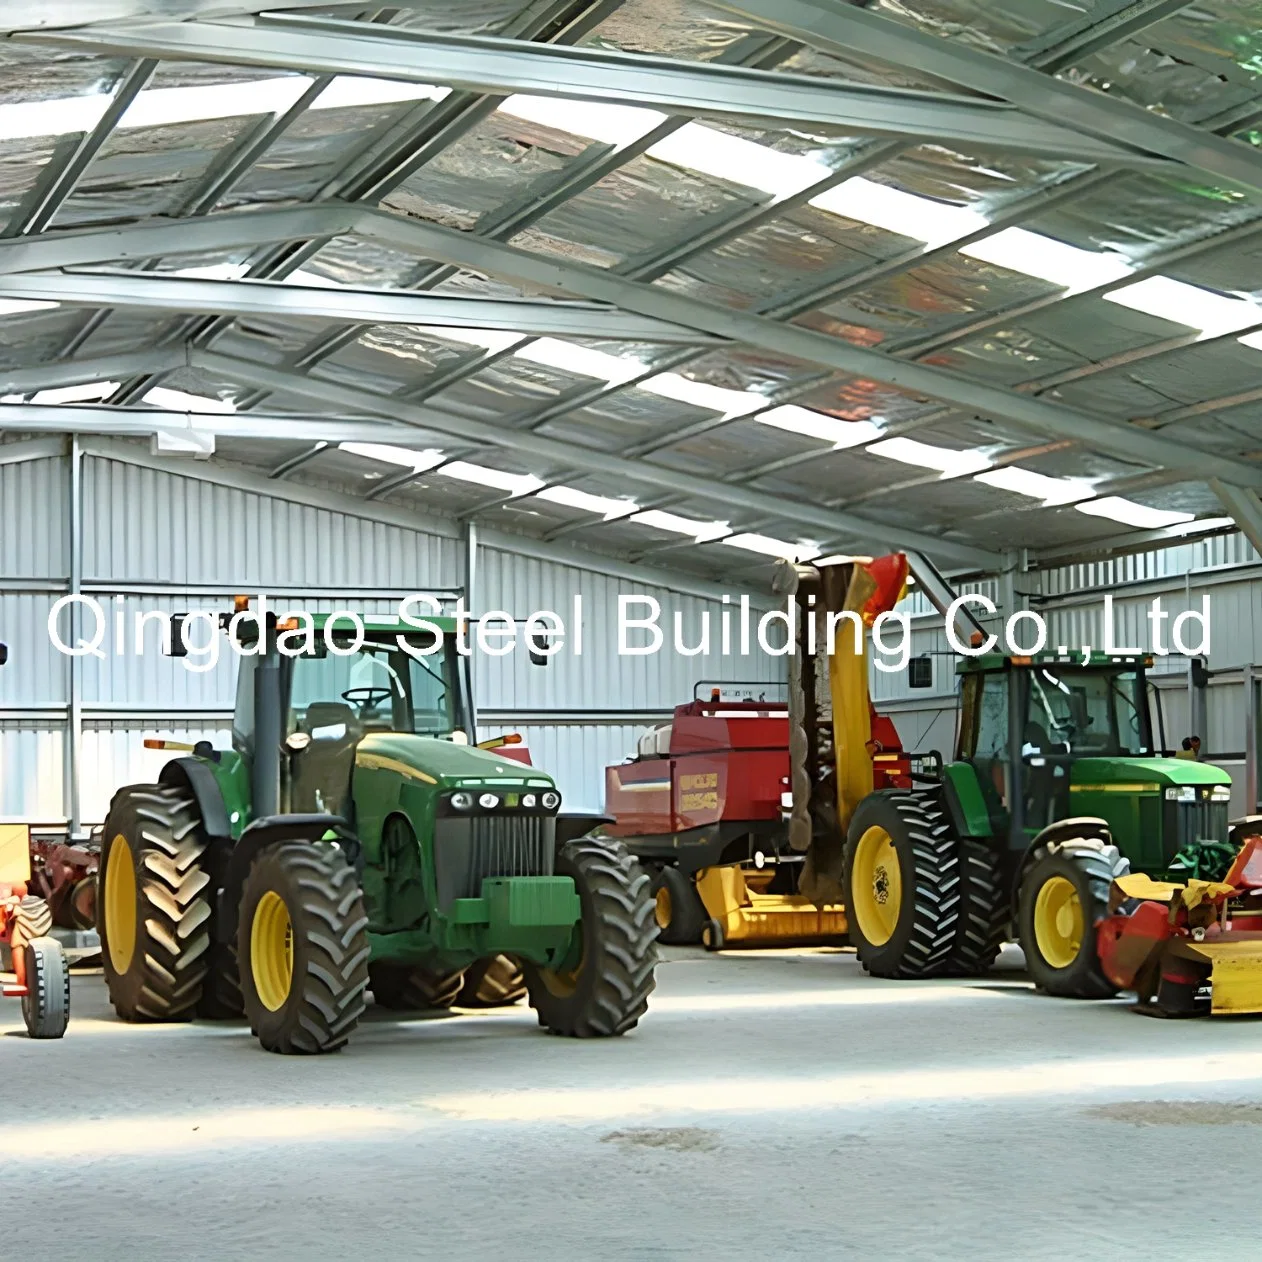 Prefabricated Steeel Structure Industrial Building Farm Storage Shed Warehouse Construction Building CE